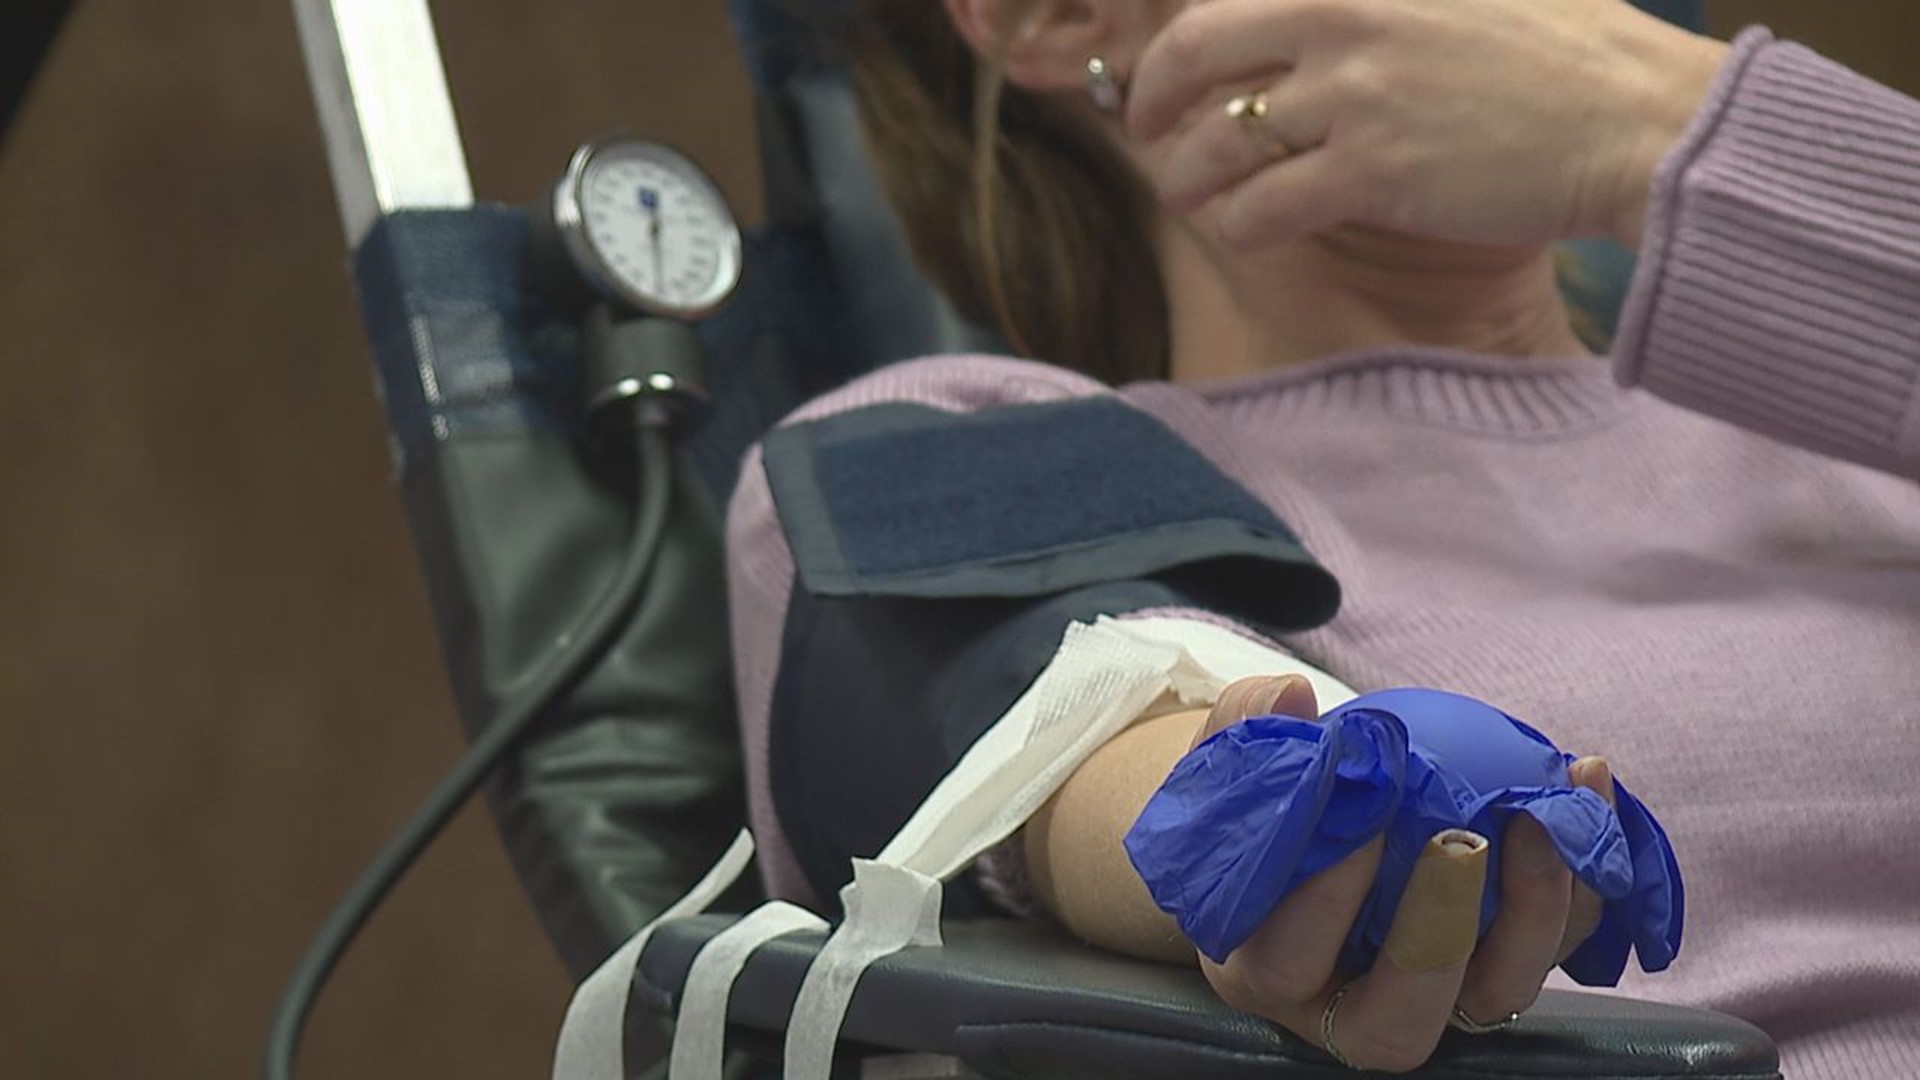 The annual competition puts several police departments against one another to see who can get the most people to donate blood.